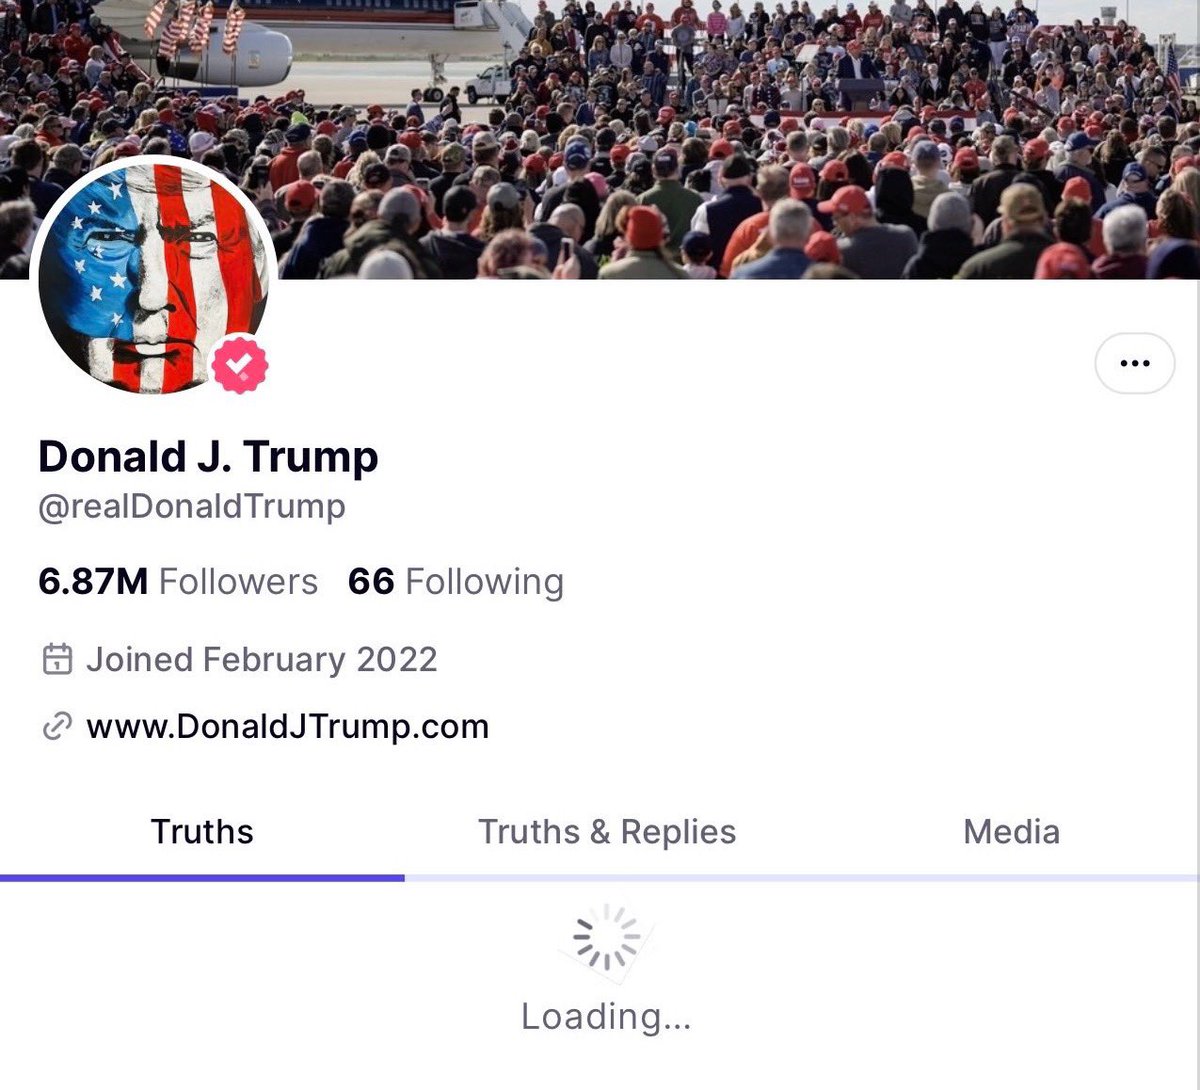 It actually is a Good Friday, TrumpSocial™️ is down… again.